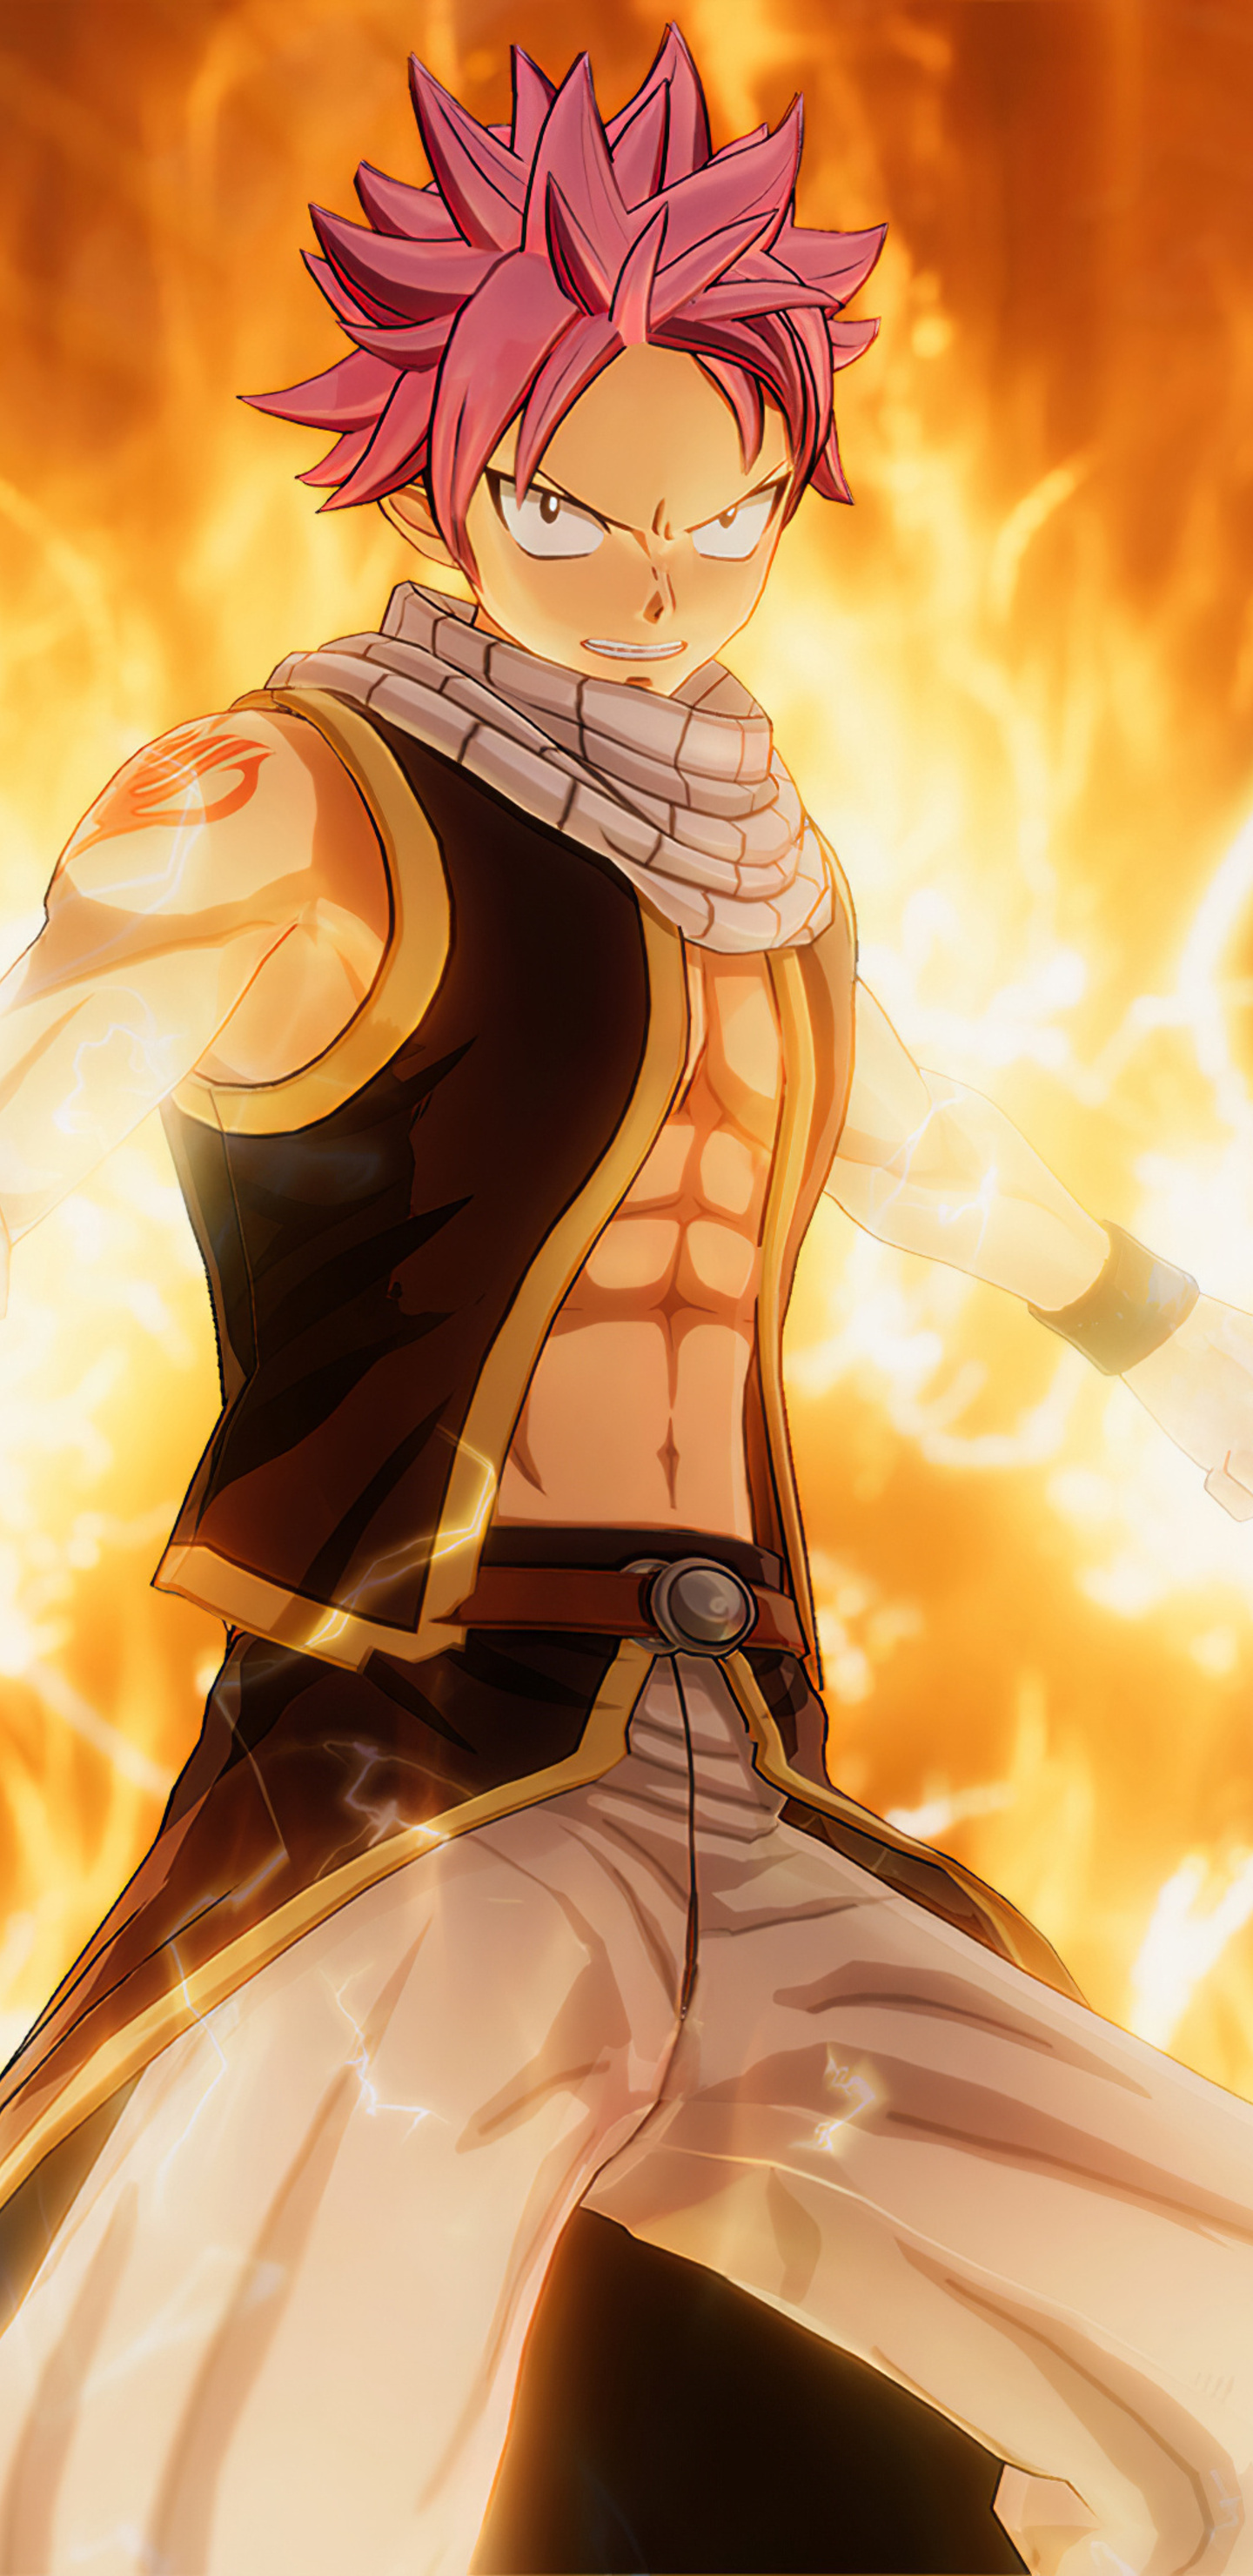 Natsu (Fairy Tail): A member of Team Natsu, The younger brother of Zeref Dragneel. 1440x2960 HD Wallpaper.